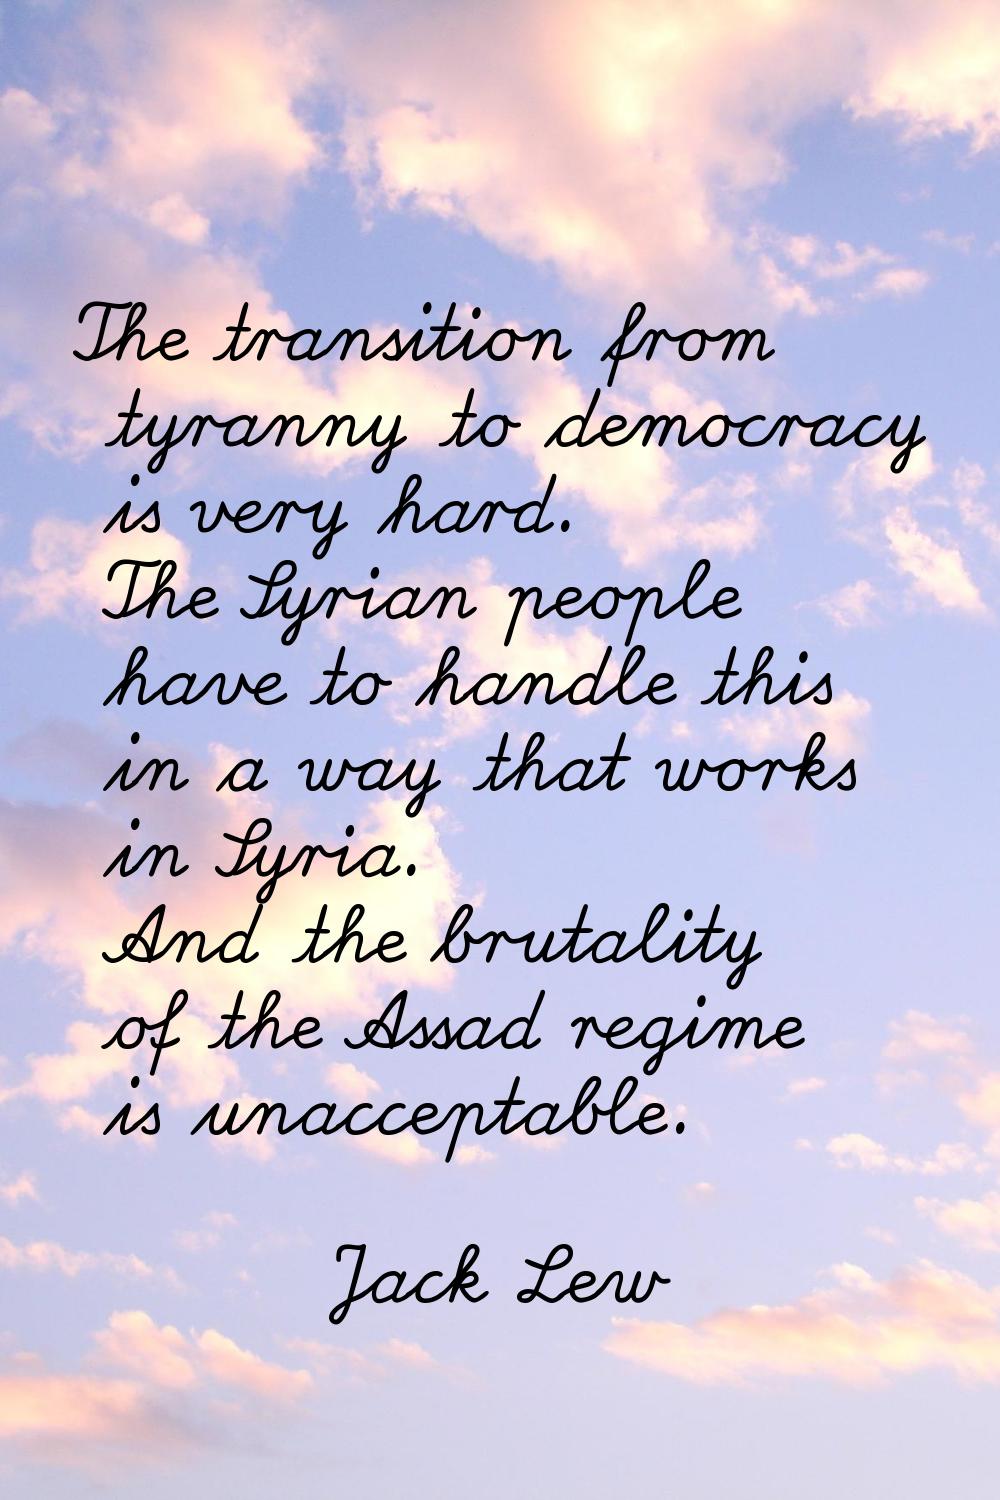 The transition from tyranny to democracy is very hard. The Syrian people have to handle this in a w